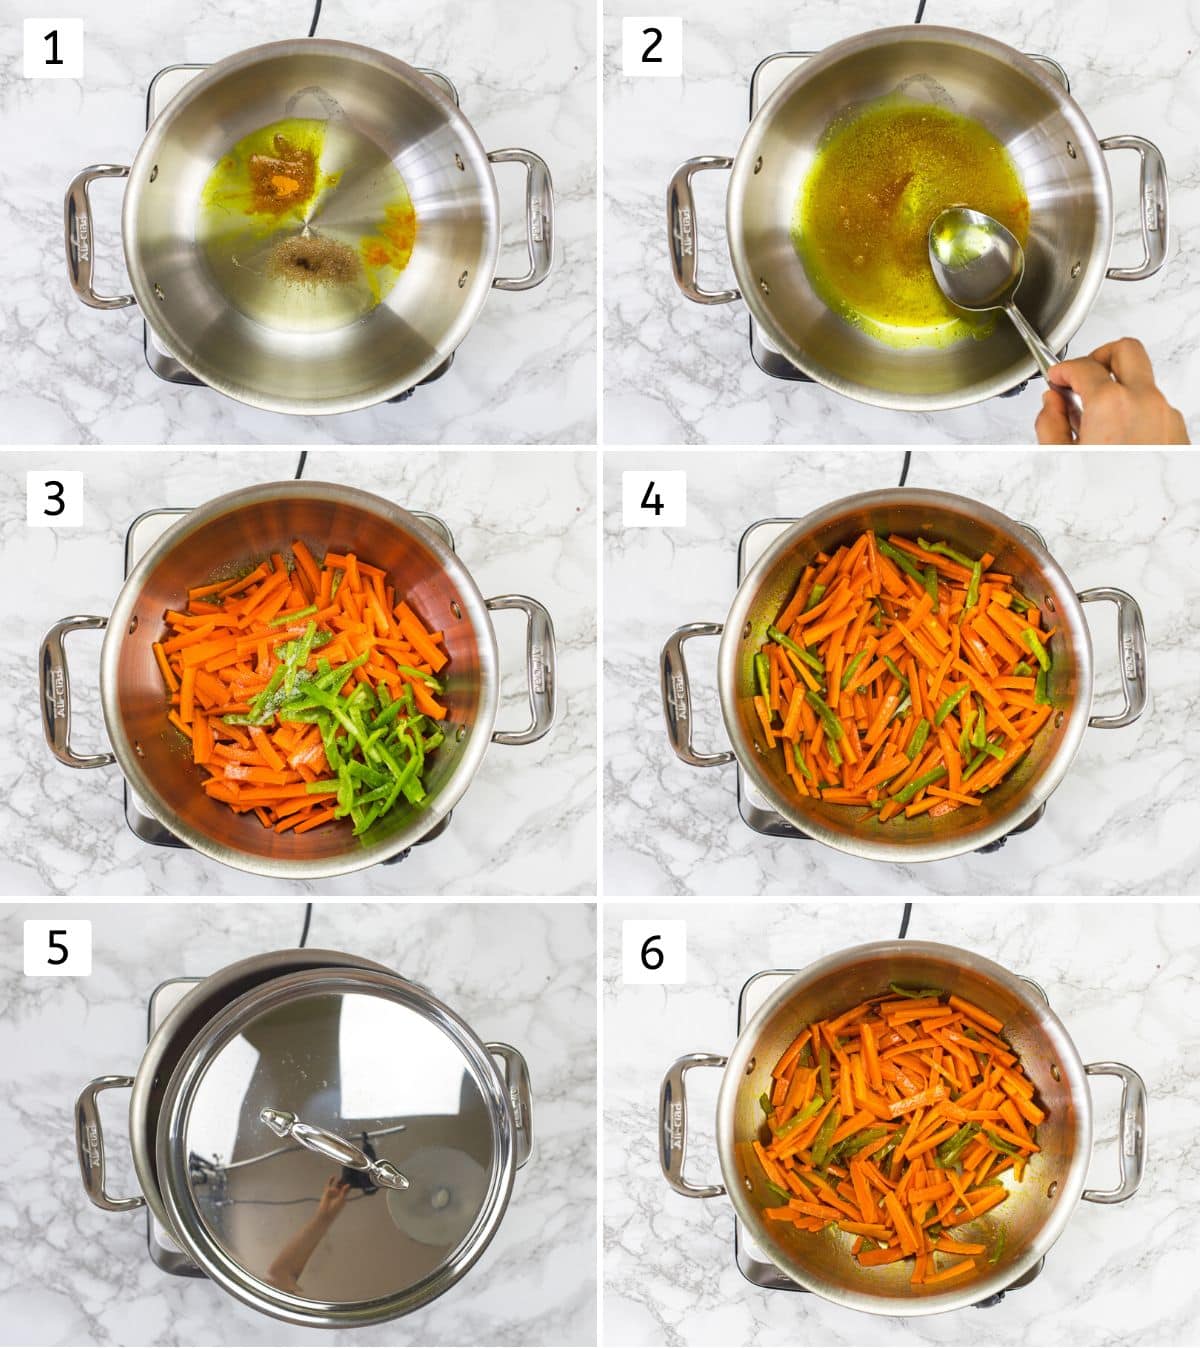 Collage of 6 steps showing making tempering, adding carrot and chili, cooking covered.